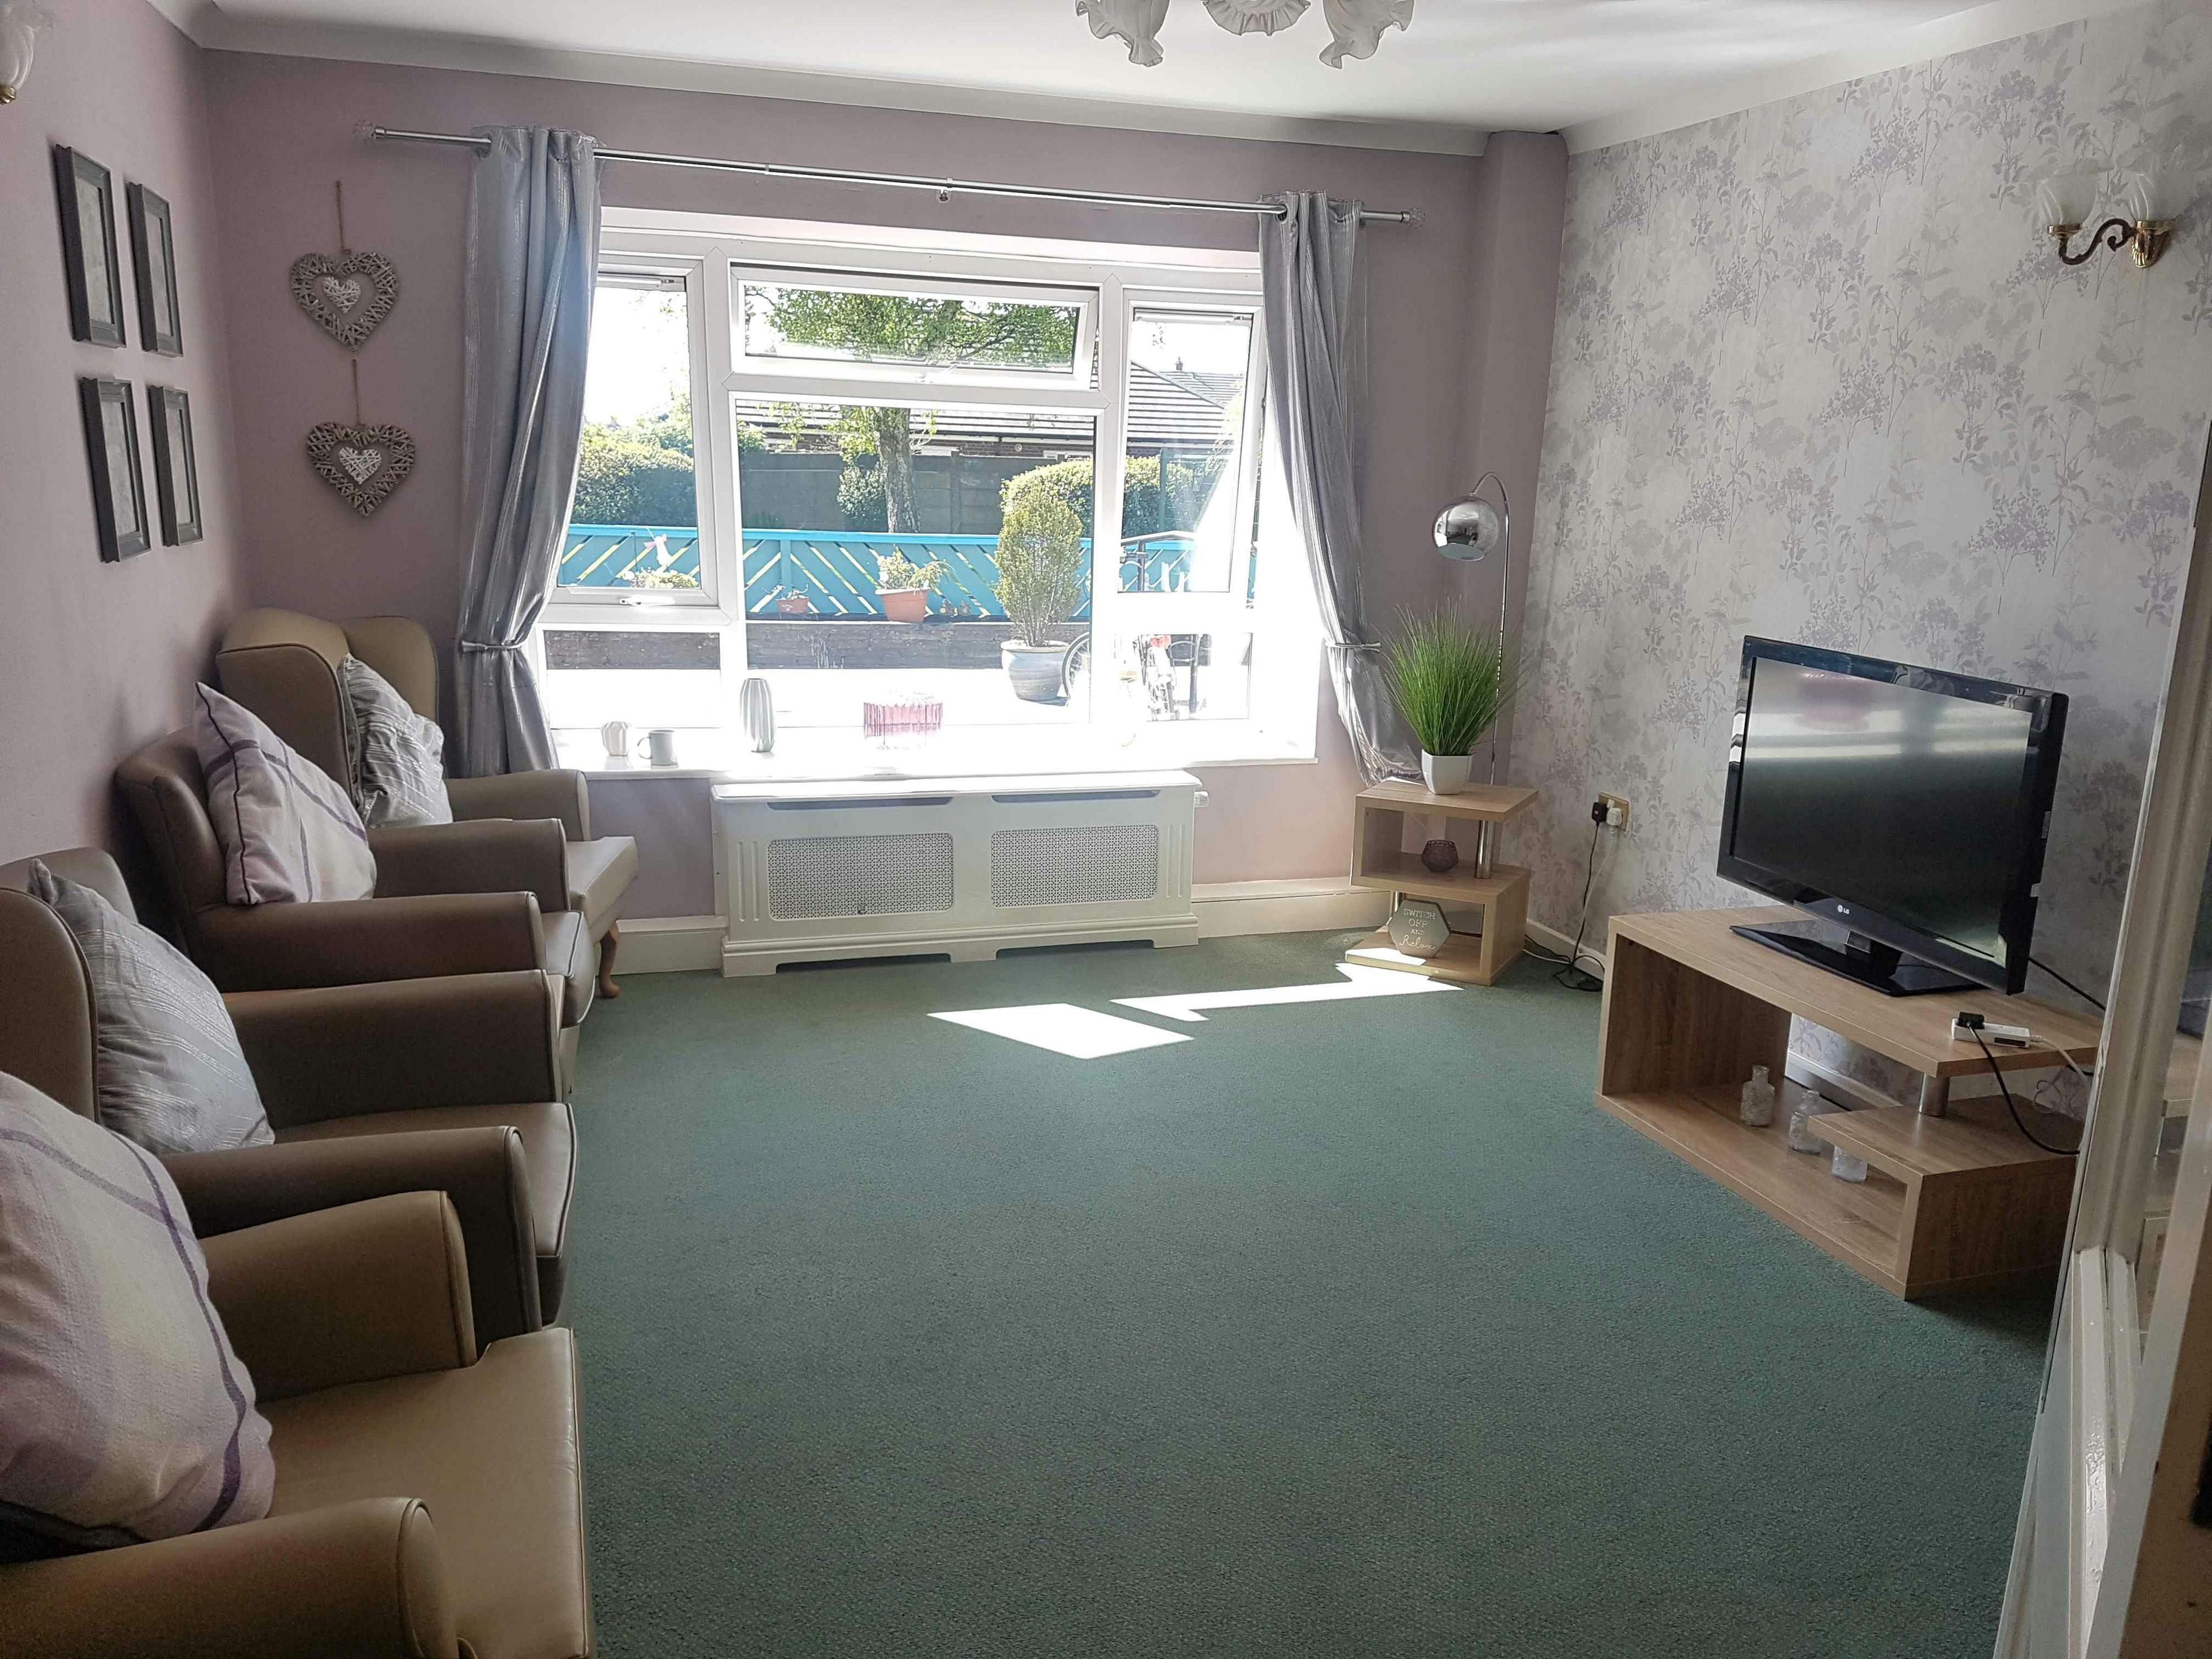 Minster Care Group - Hourigan House care home 1